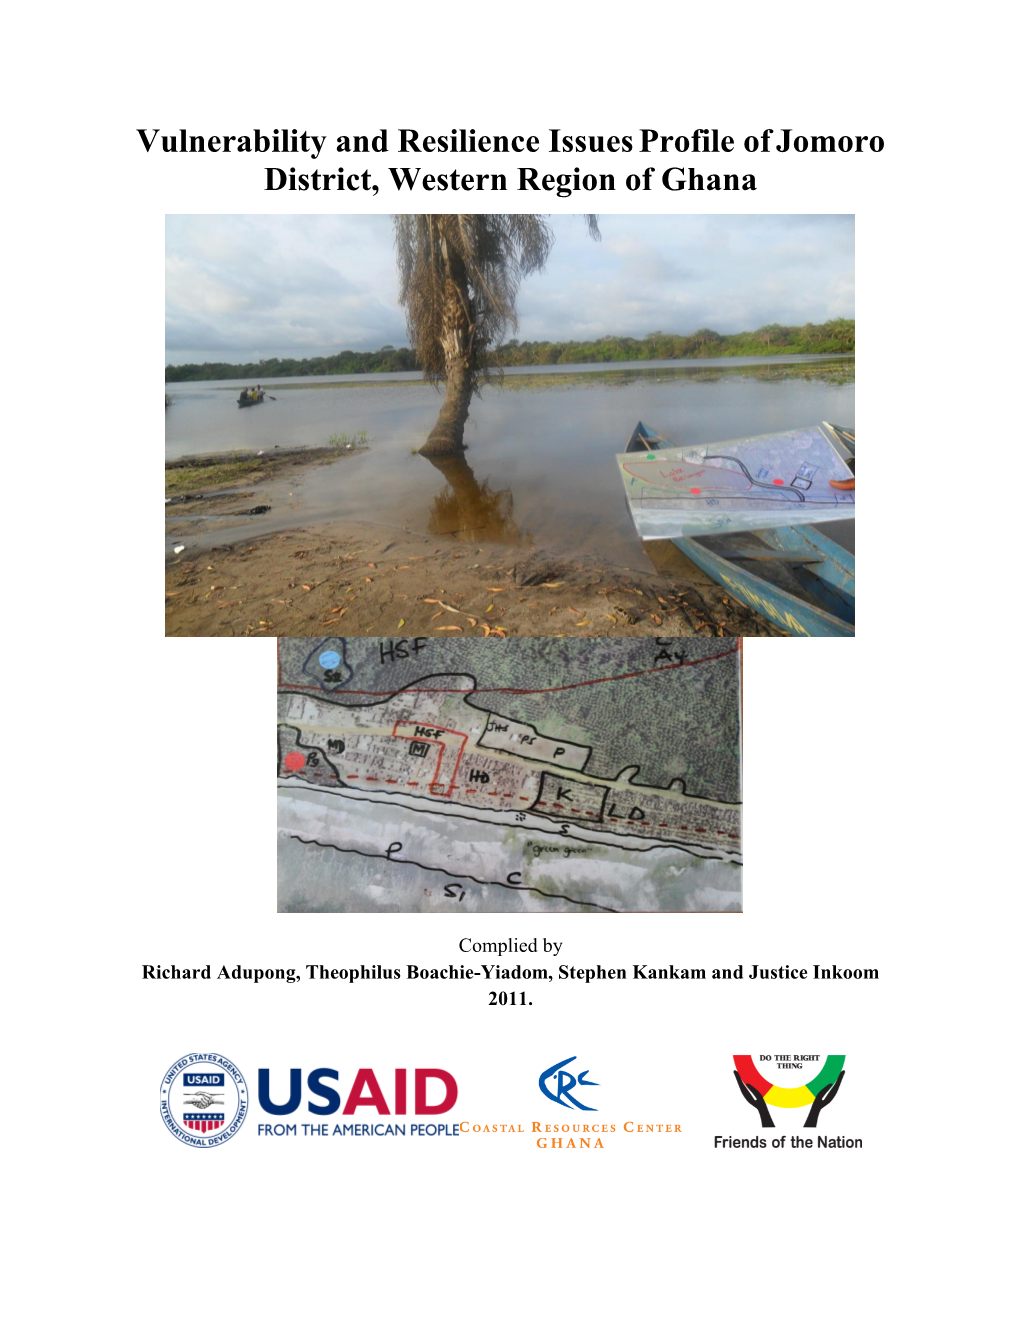 Vulnerability and Resilience Issues Profile of Jomoro District.Pdf